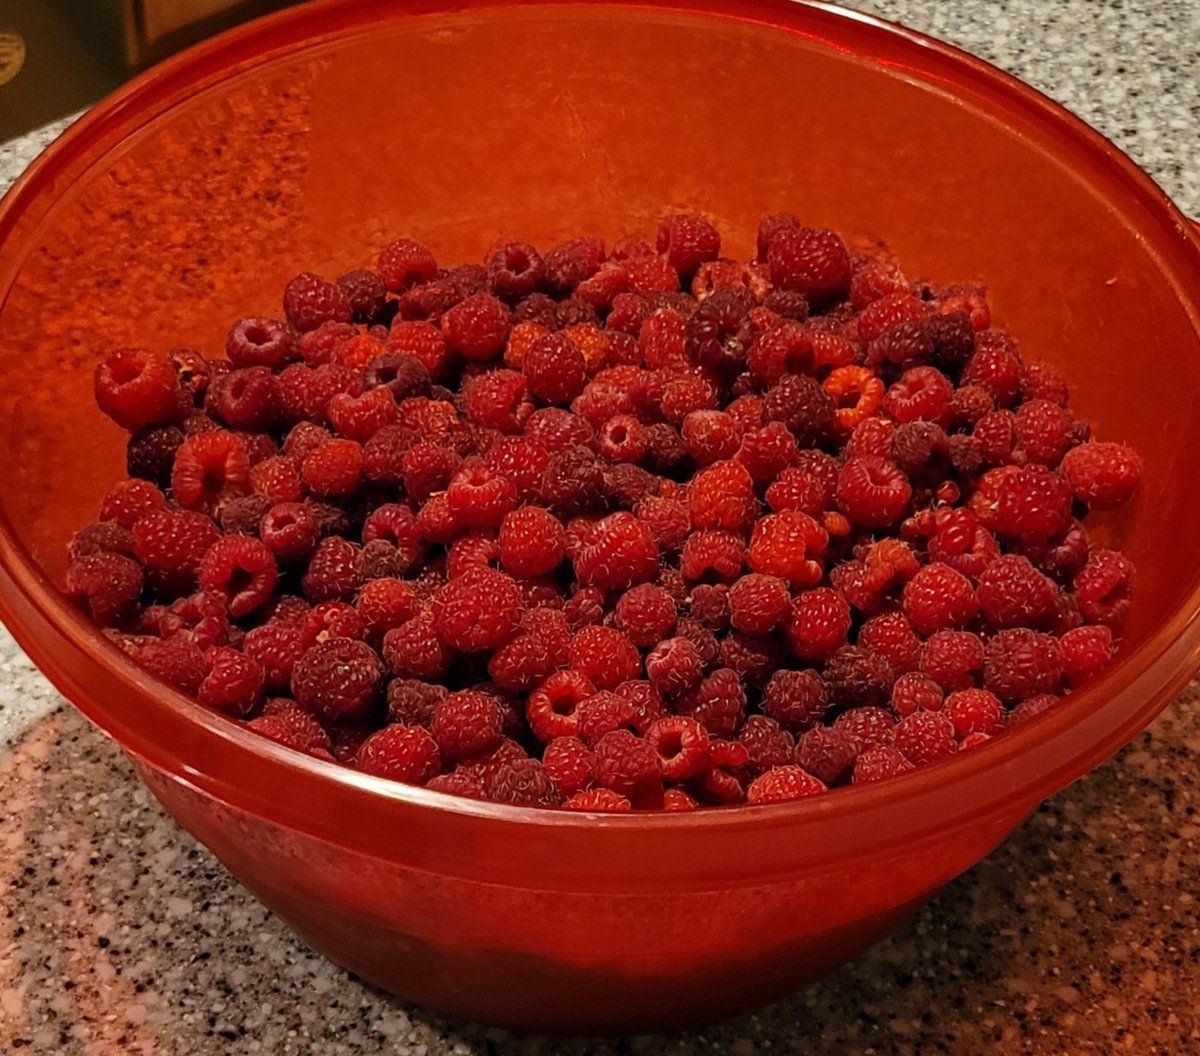 My days finally allow me to pick the raspberries - and make jelly! Read my blog @ my2cents.click/2022/07/26/a-s…
#retirementjoy #raspberryjelly #fruitsofmylabor #raspberryheaven